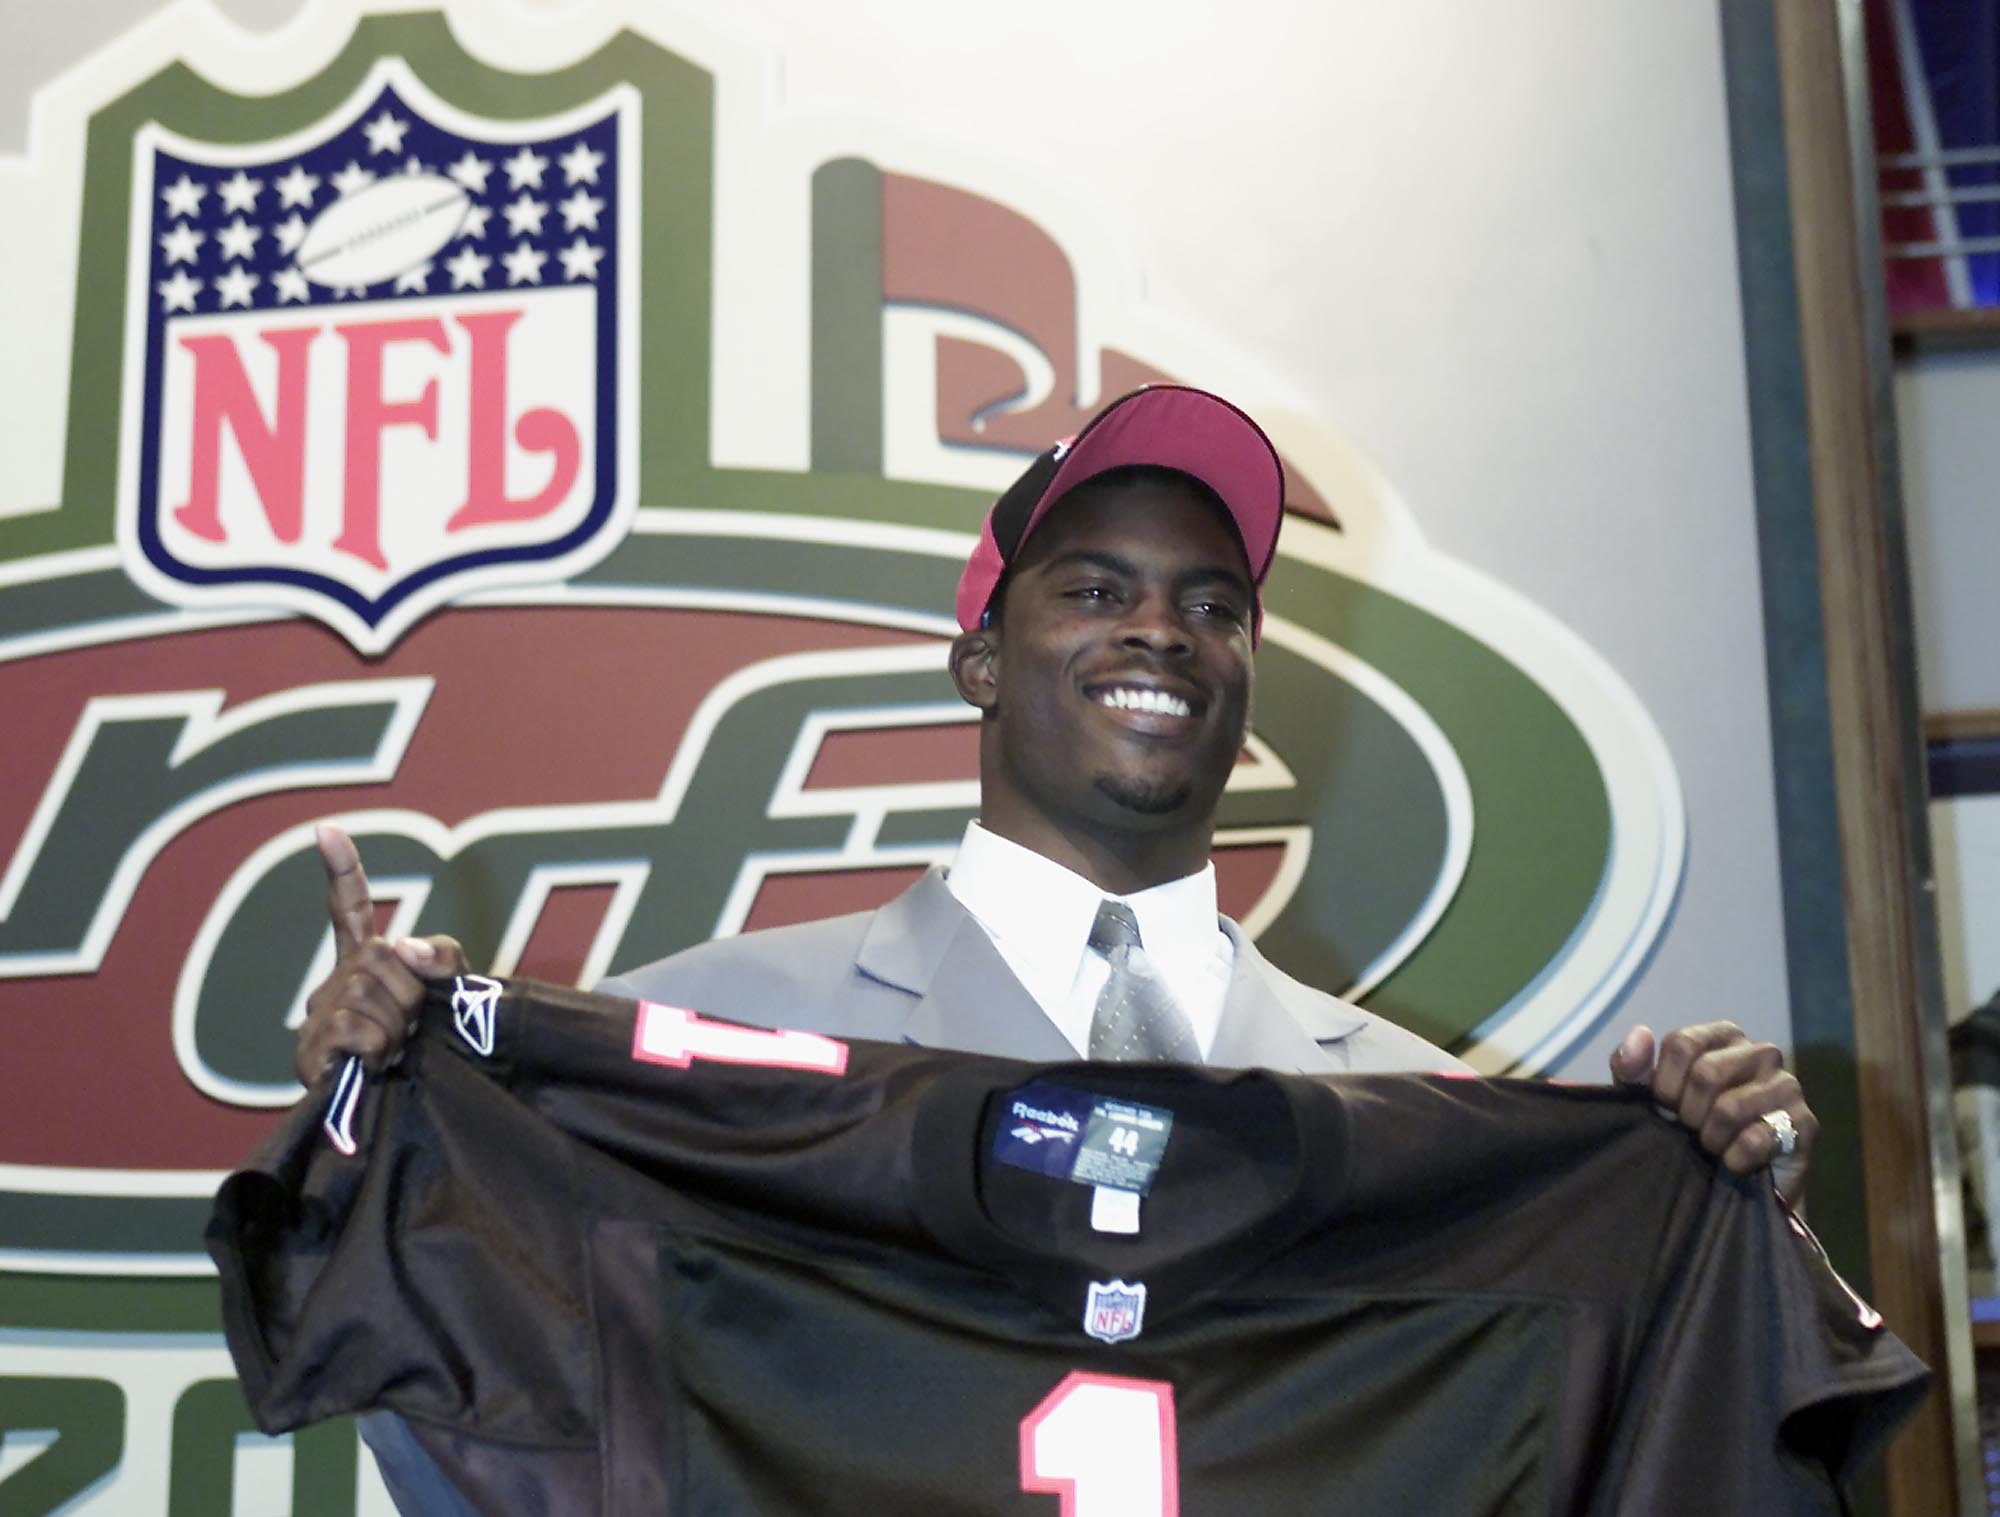 Michael Vick and Drew Brees’ Stacked 2001 NFL Draft Class: Where Are All of the 1st-Round Picks Now?